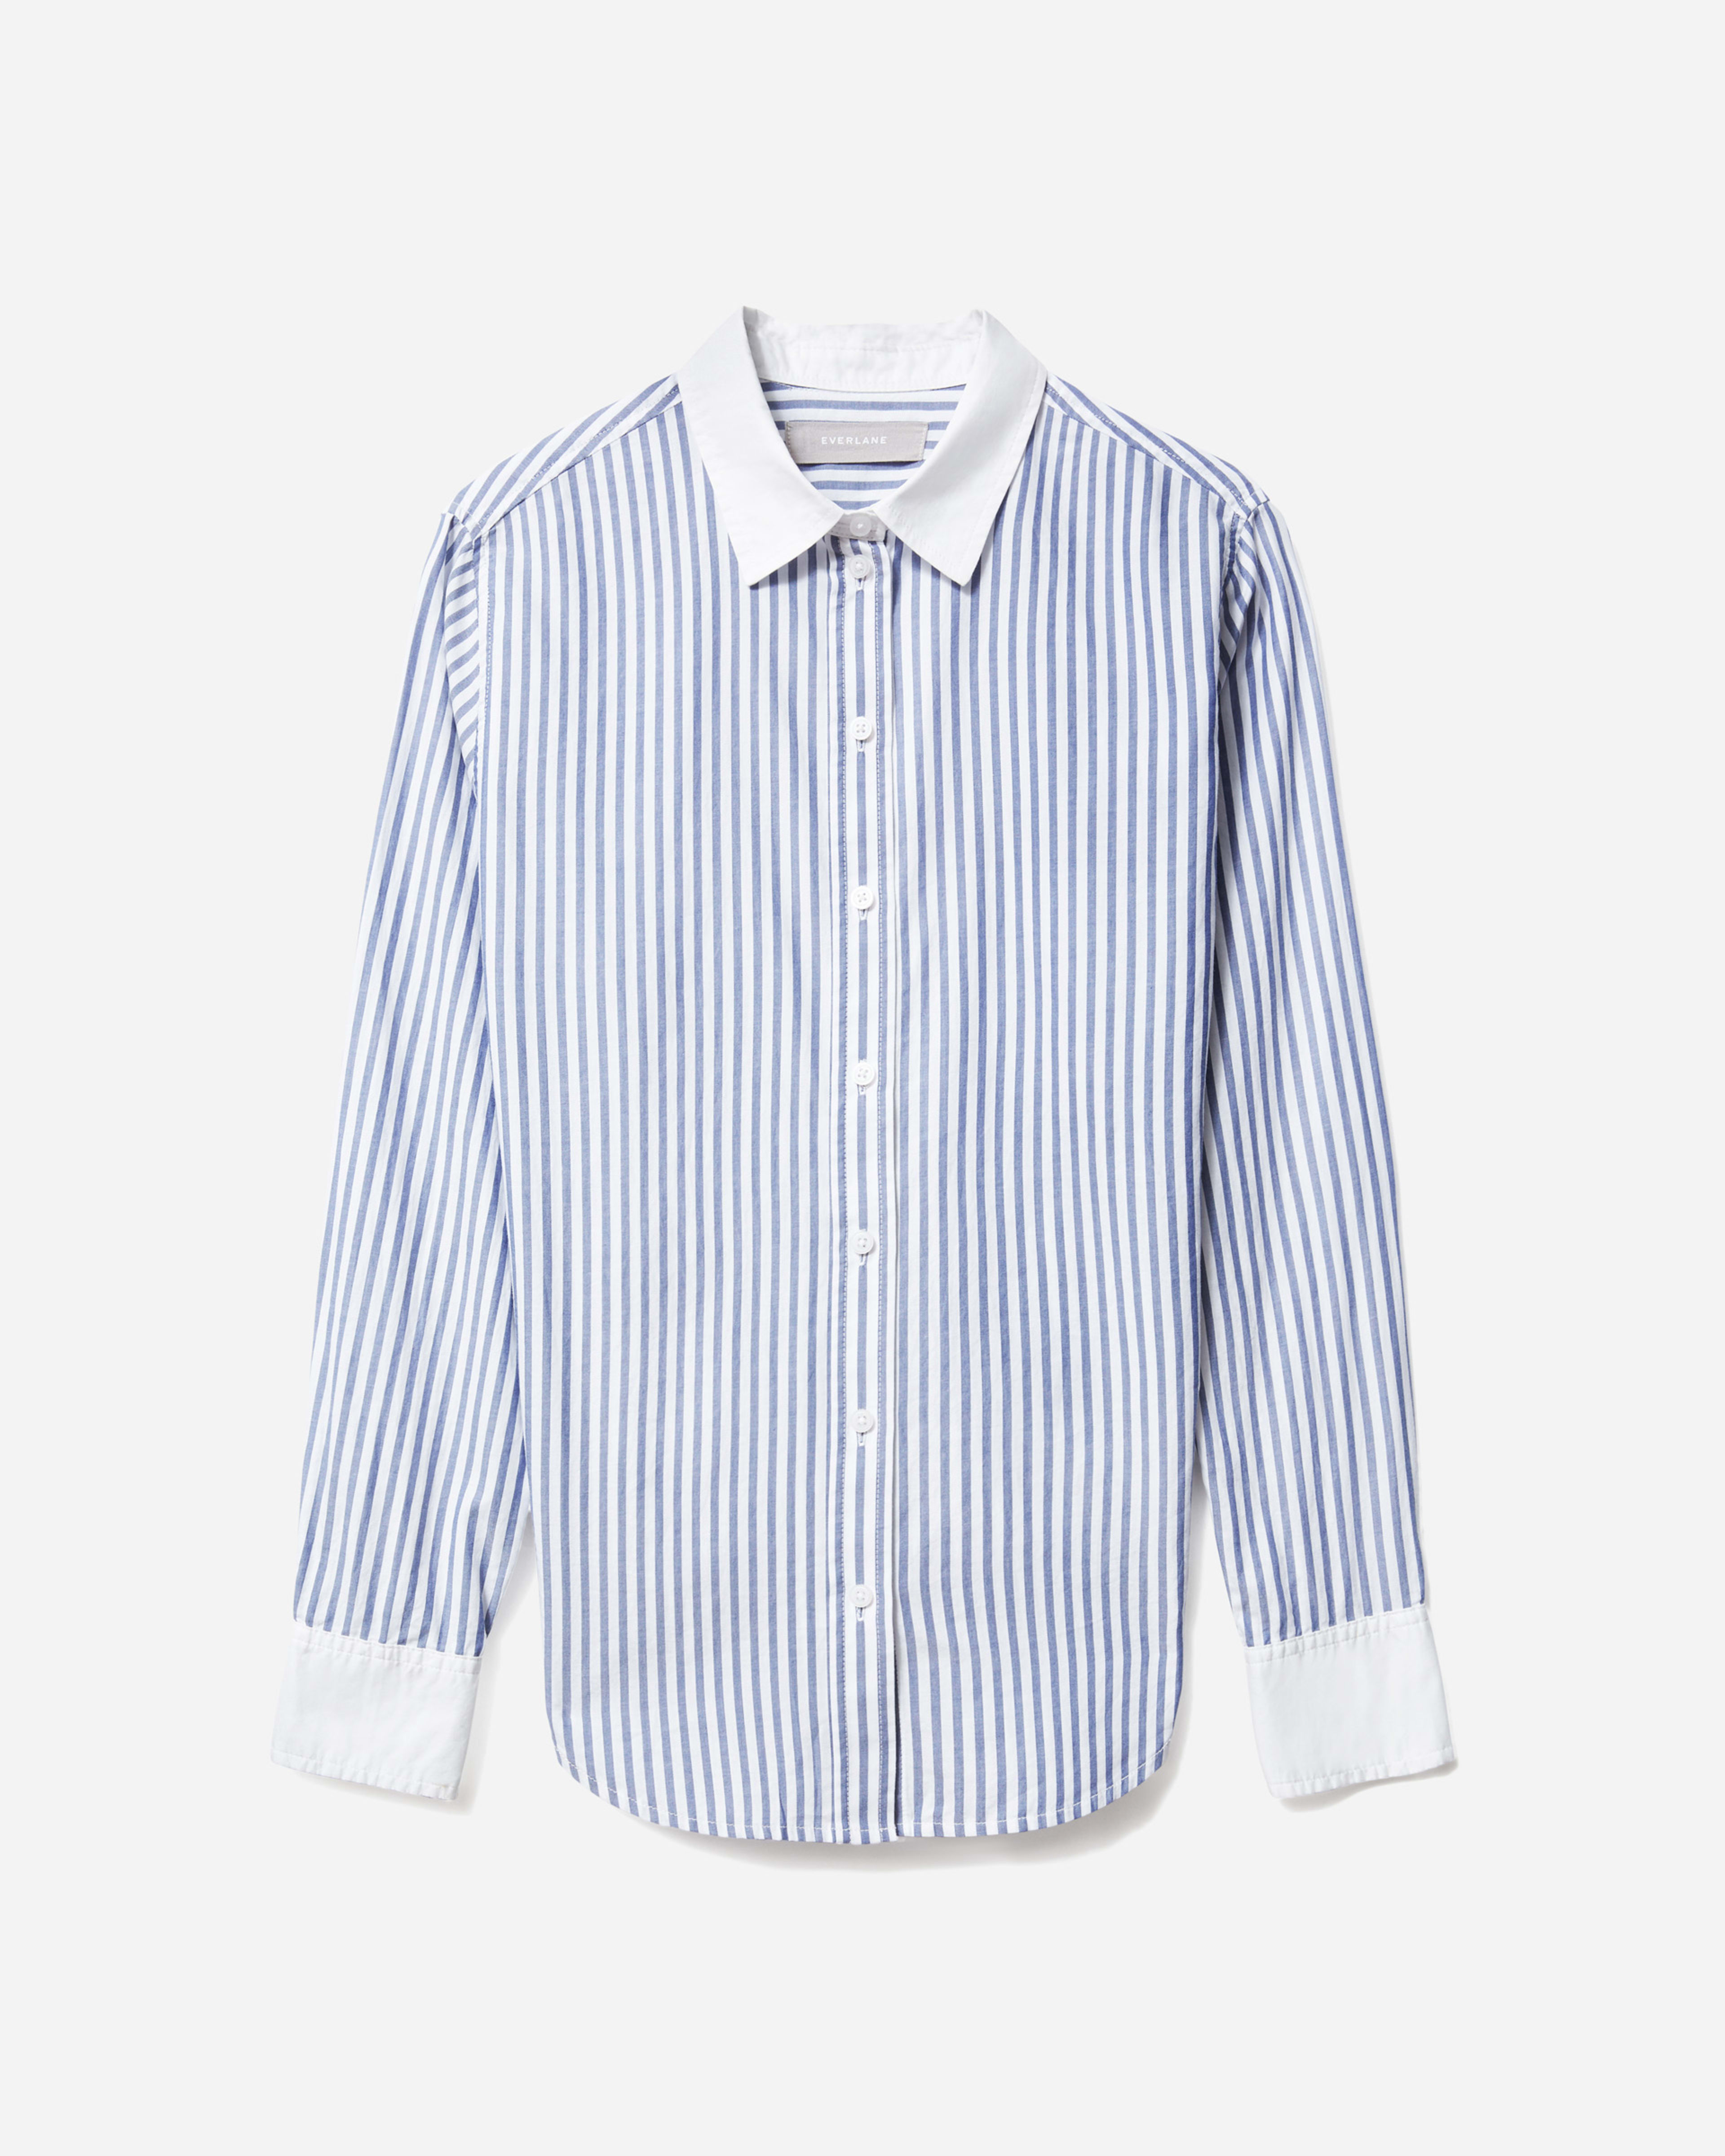 The Silky Cotton Relaxed Shirt Mariner Blue / White – Everlane